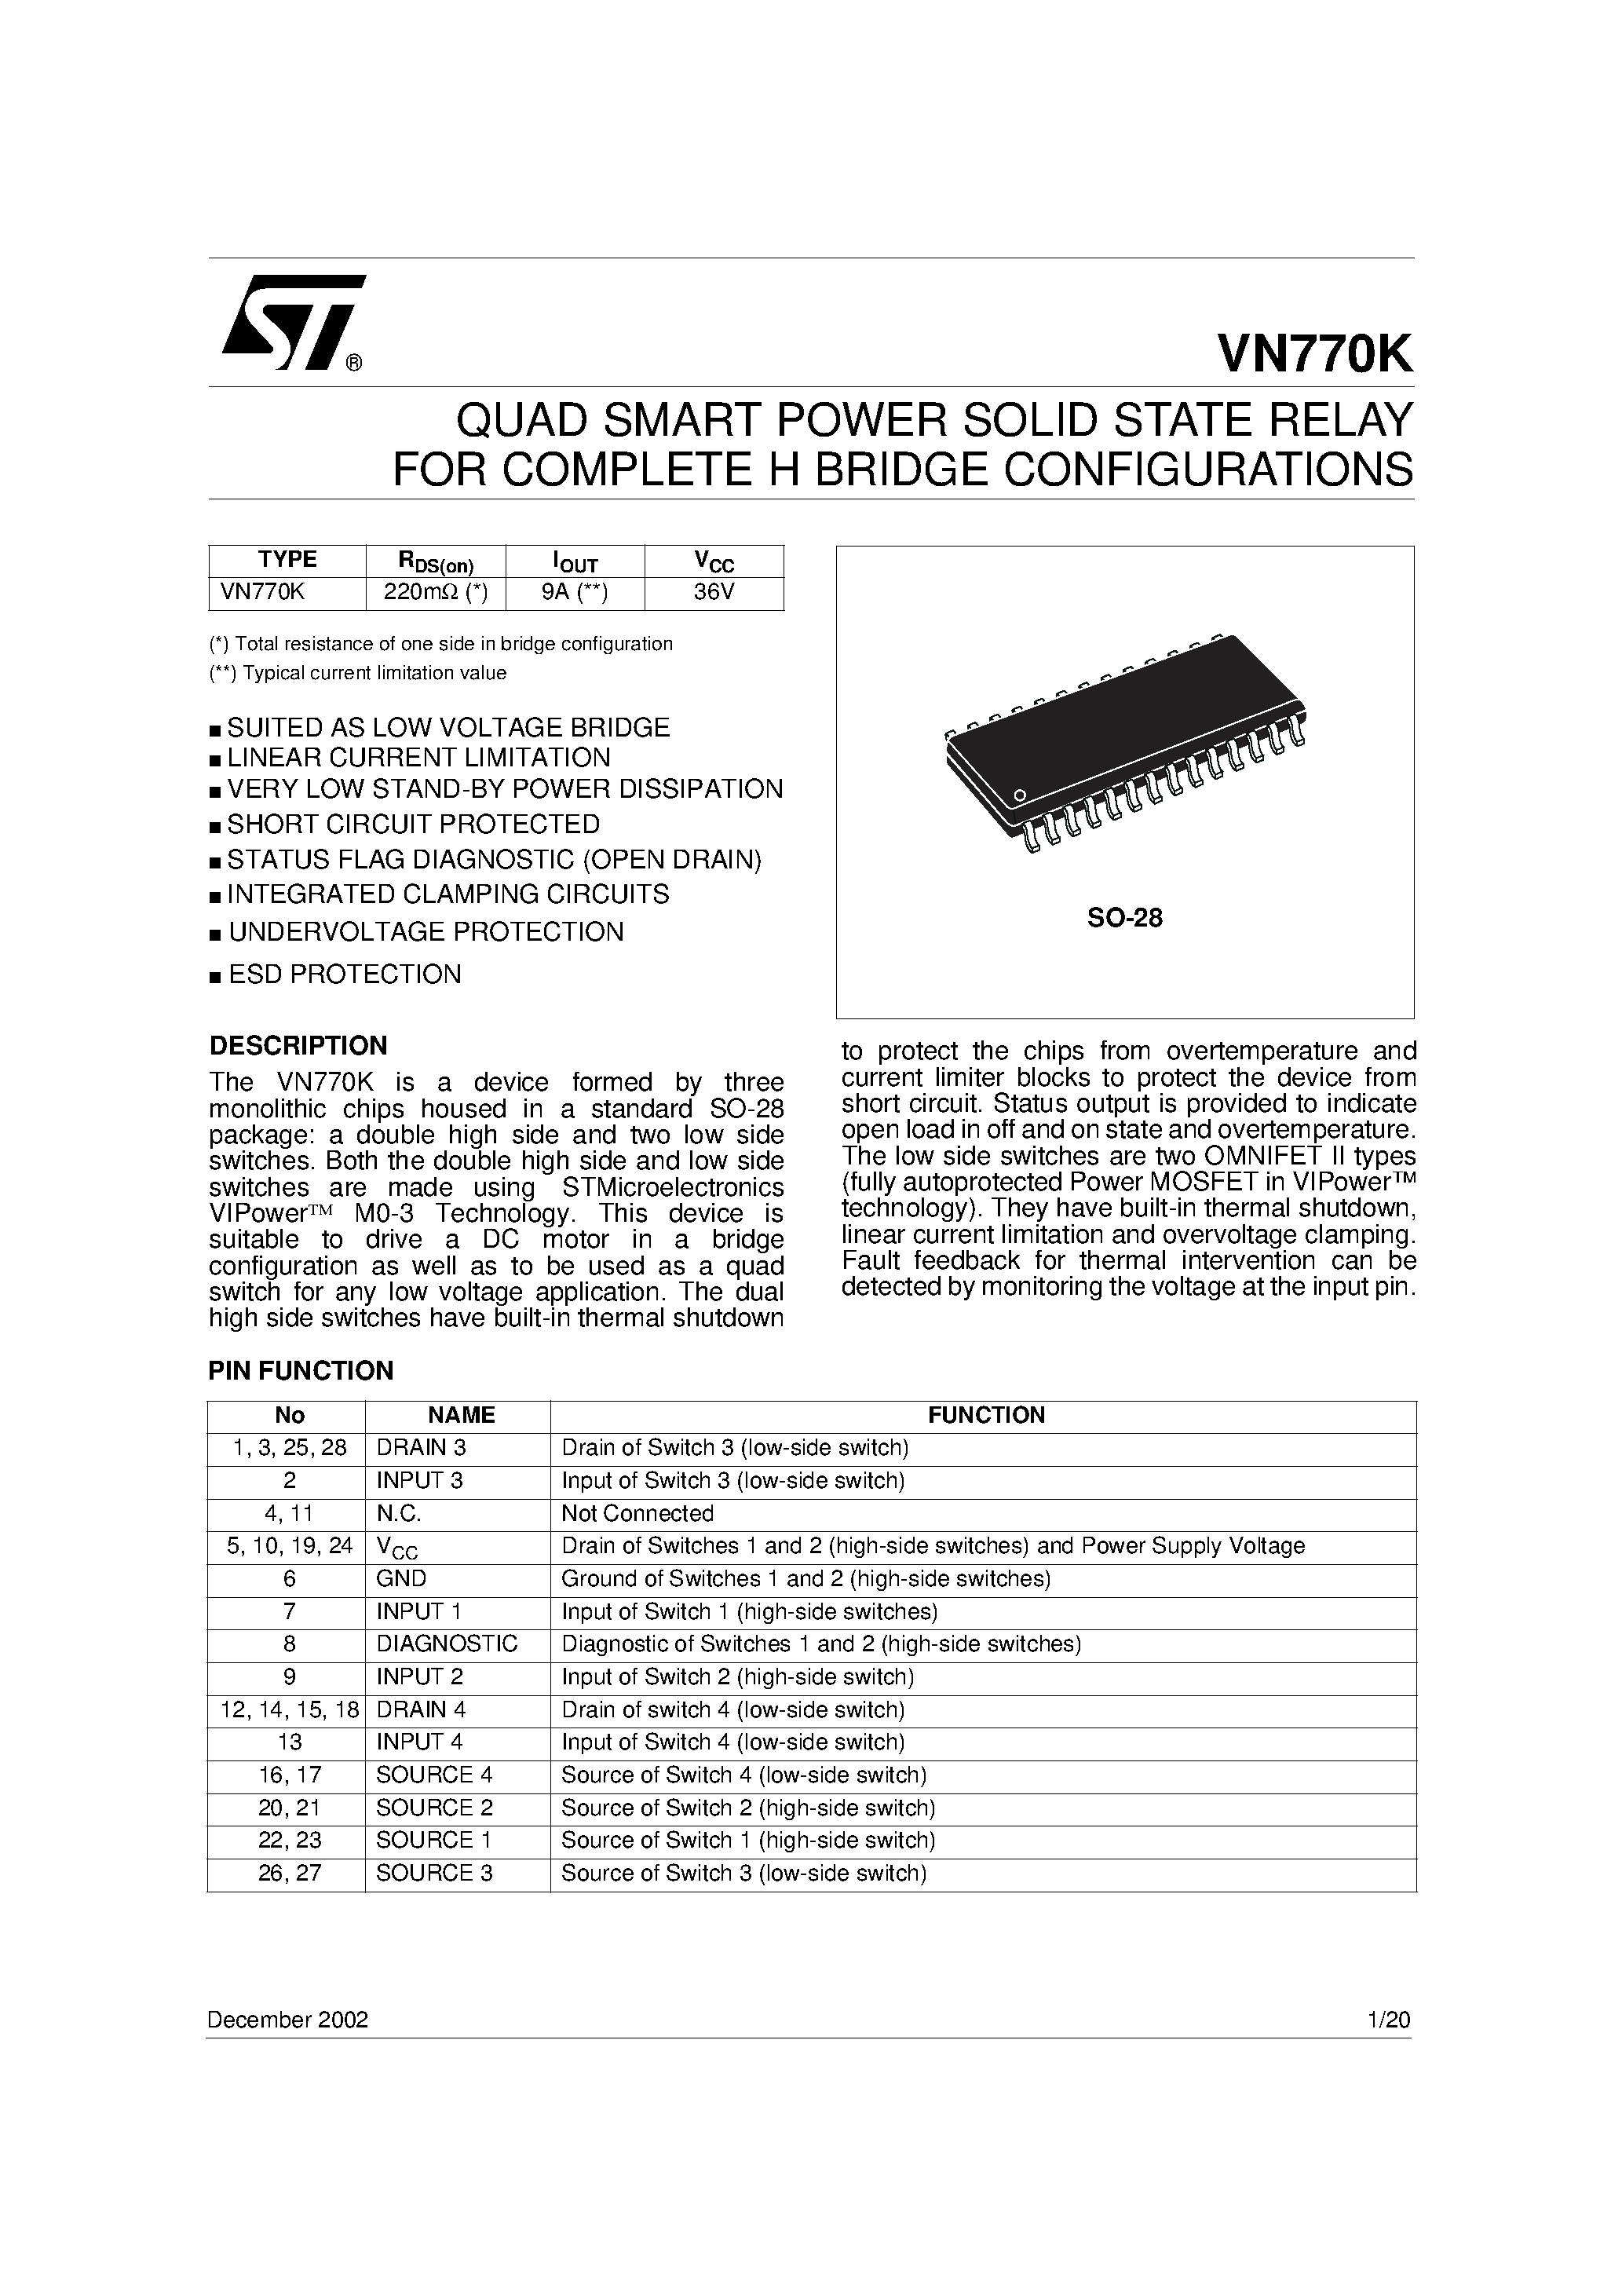 Datasheet VN770K - QUAD SMART POWER SOLID STATE RELAY FOR COMPLETE H BRIDGE CONFIGURATIONS page 1